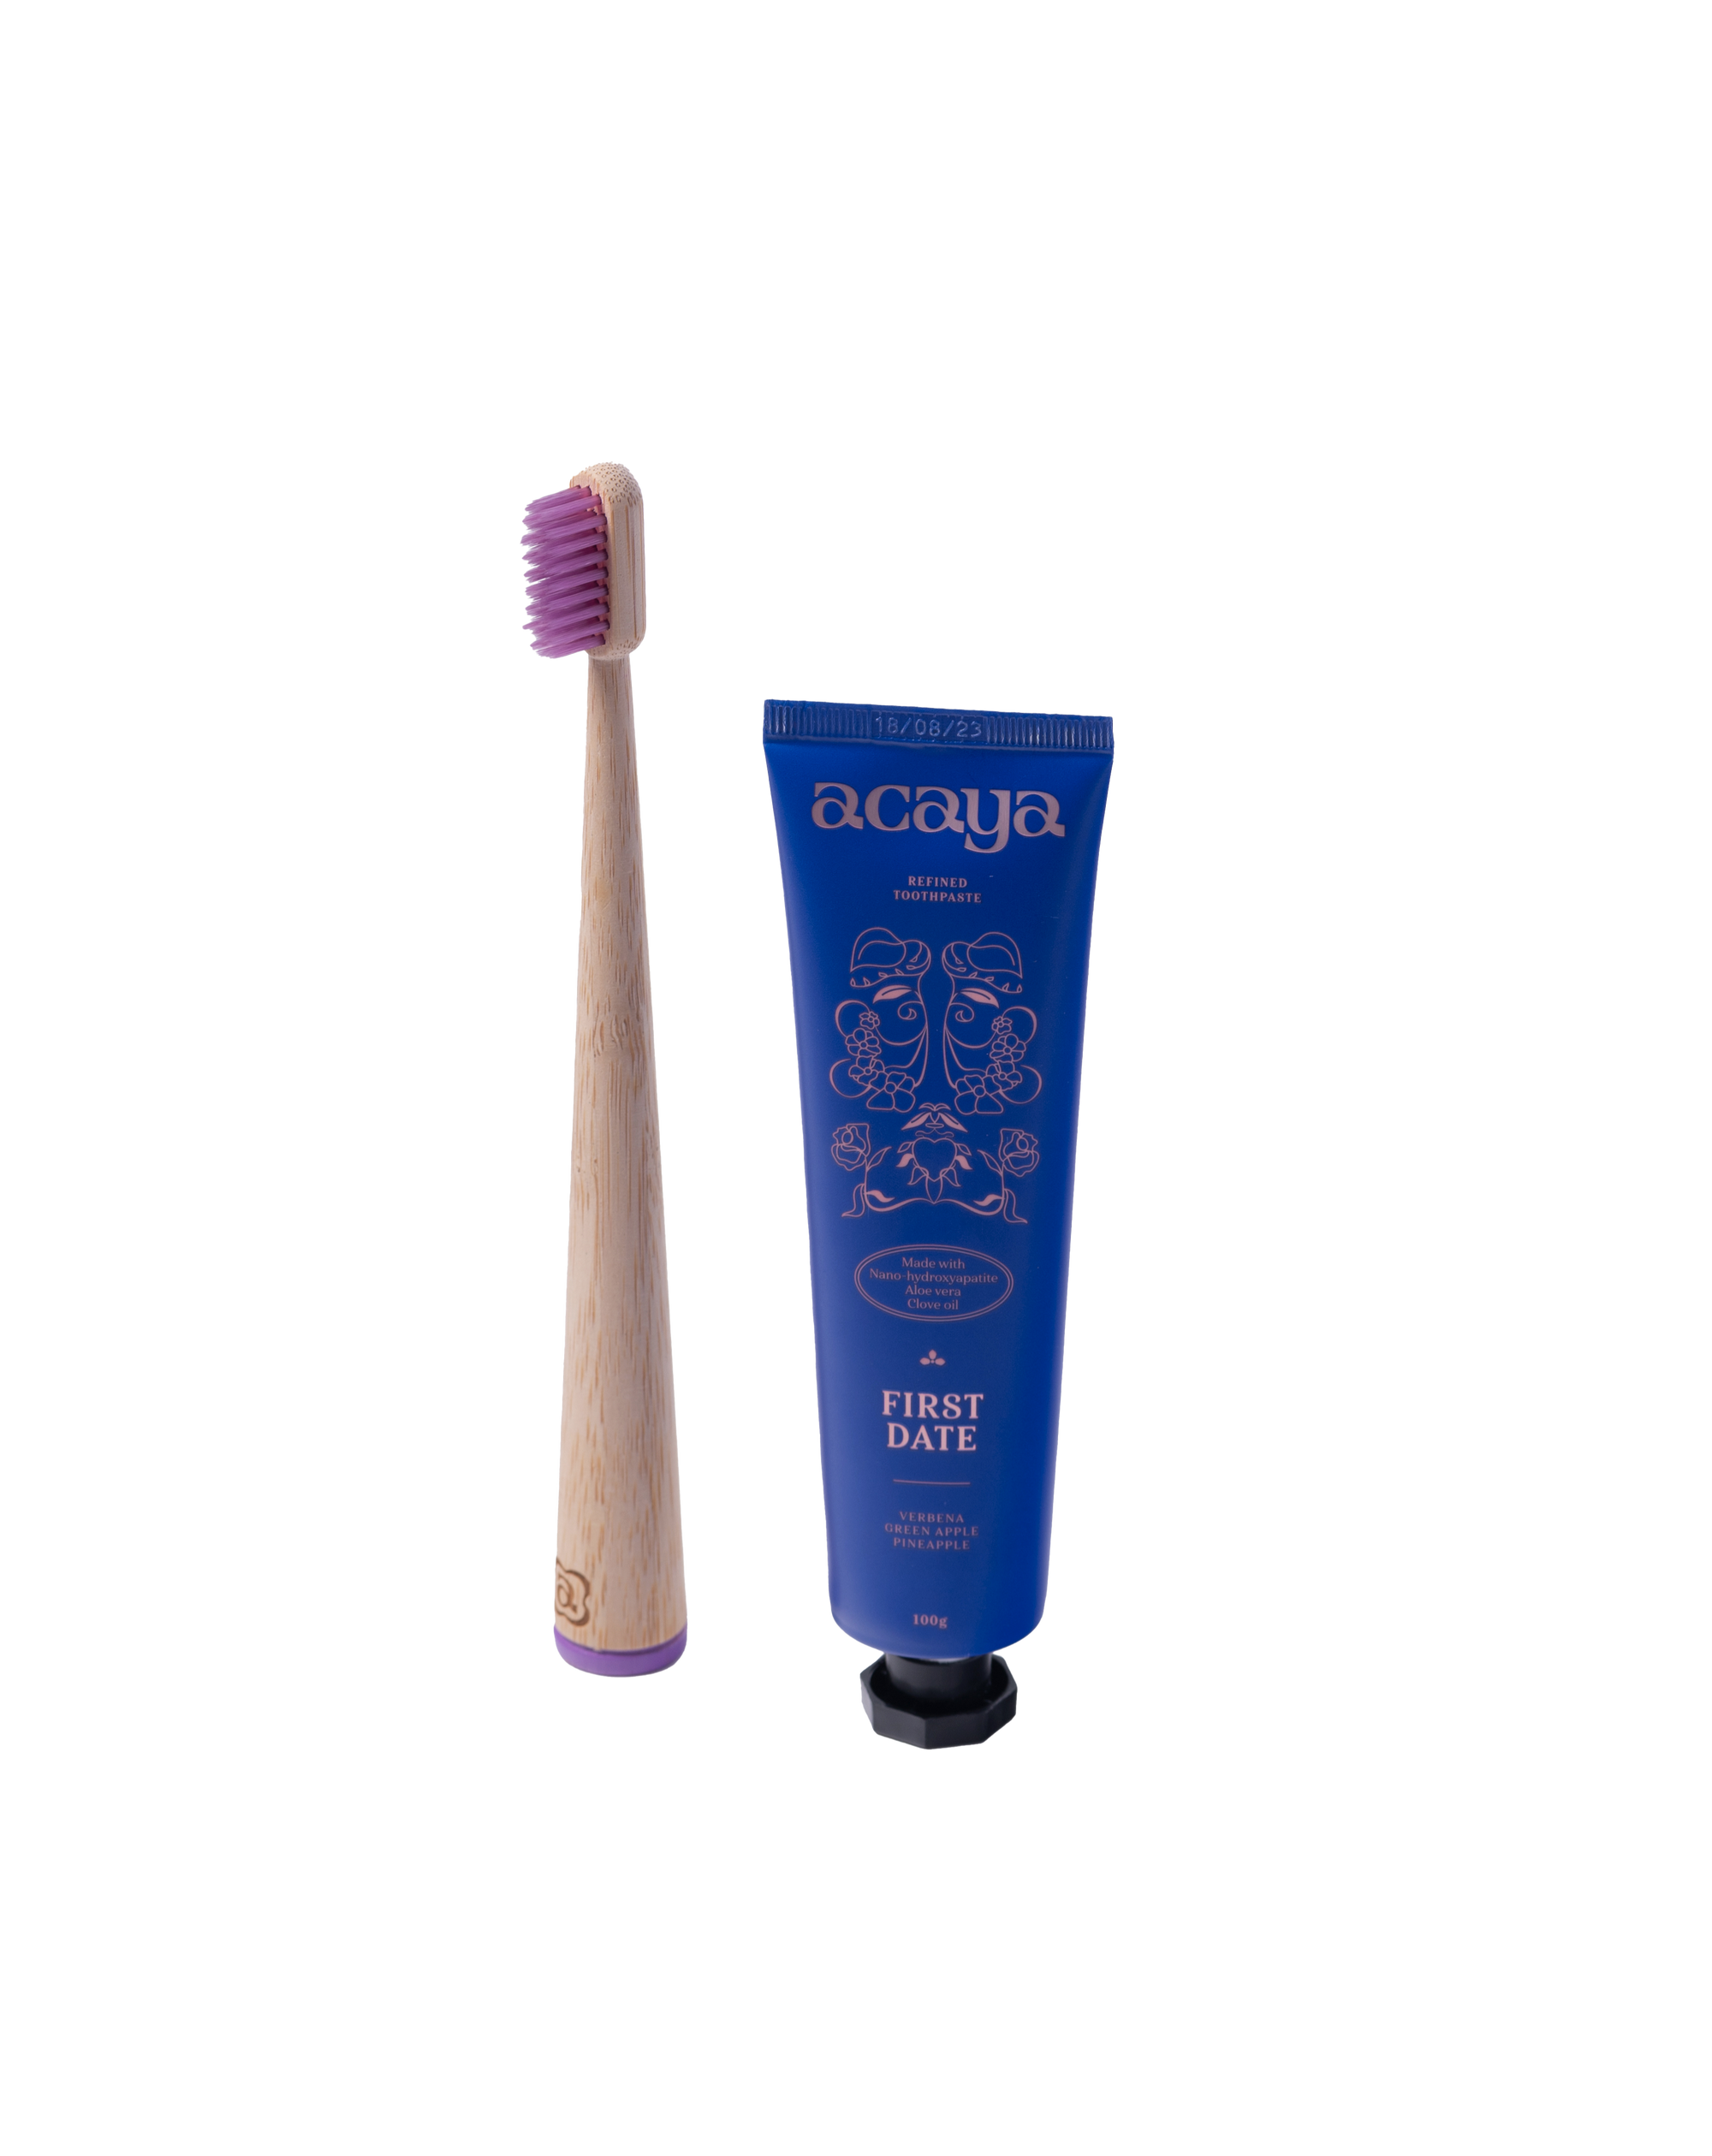 Acaya First Date toothpaste tube & Flossy Purple toothbrush